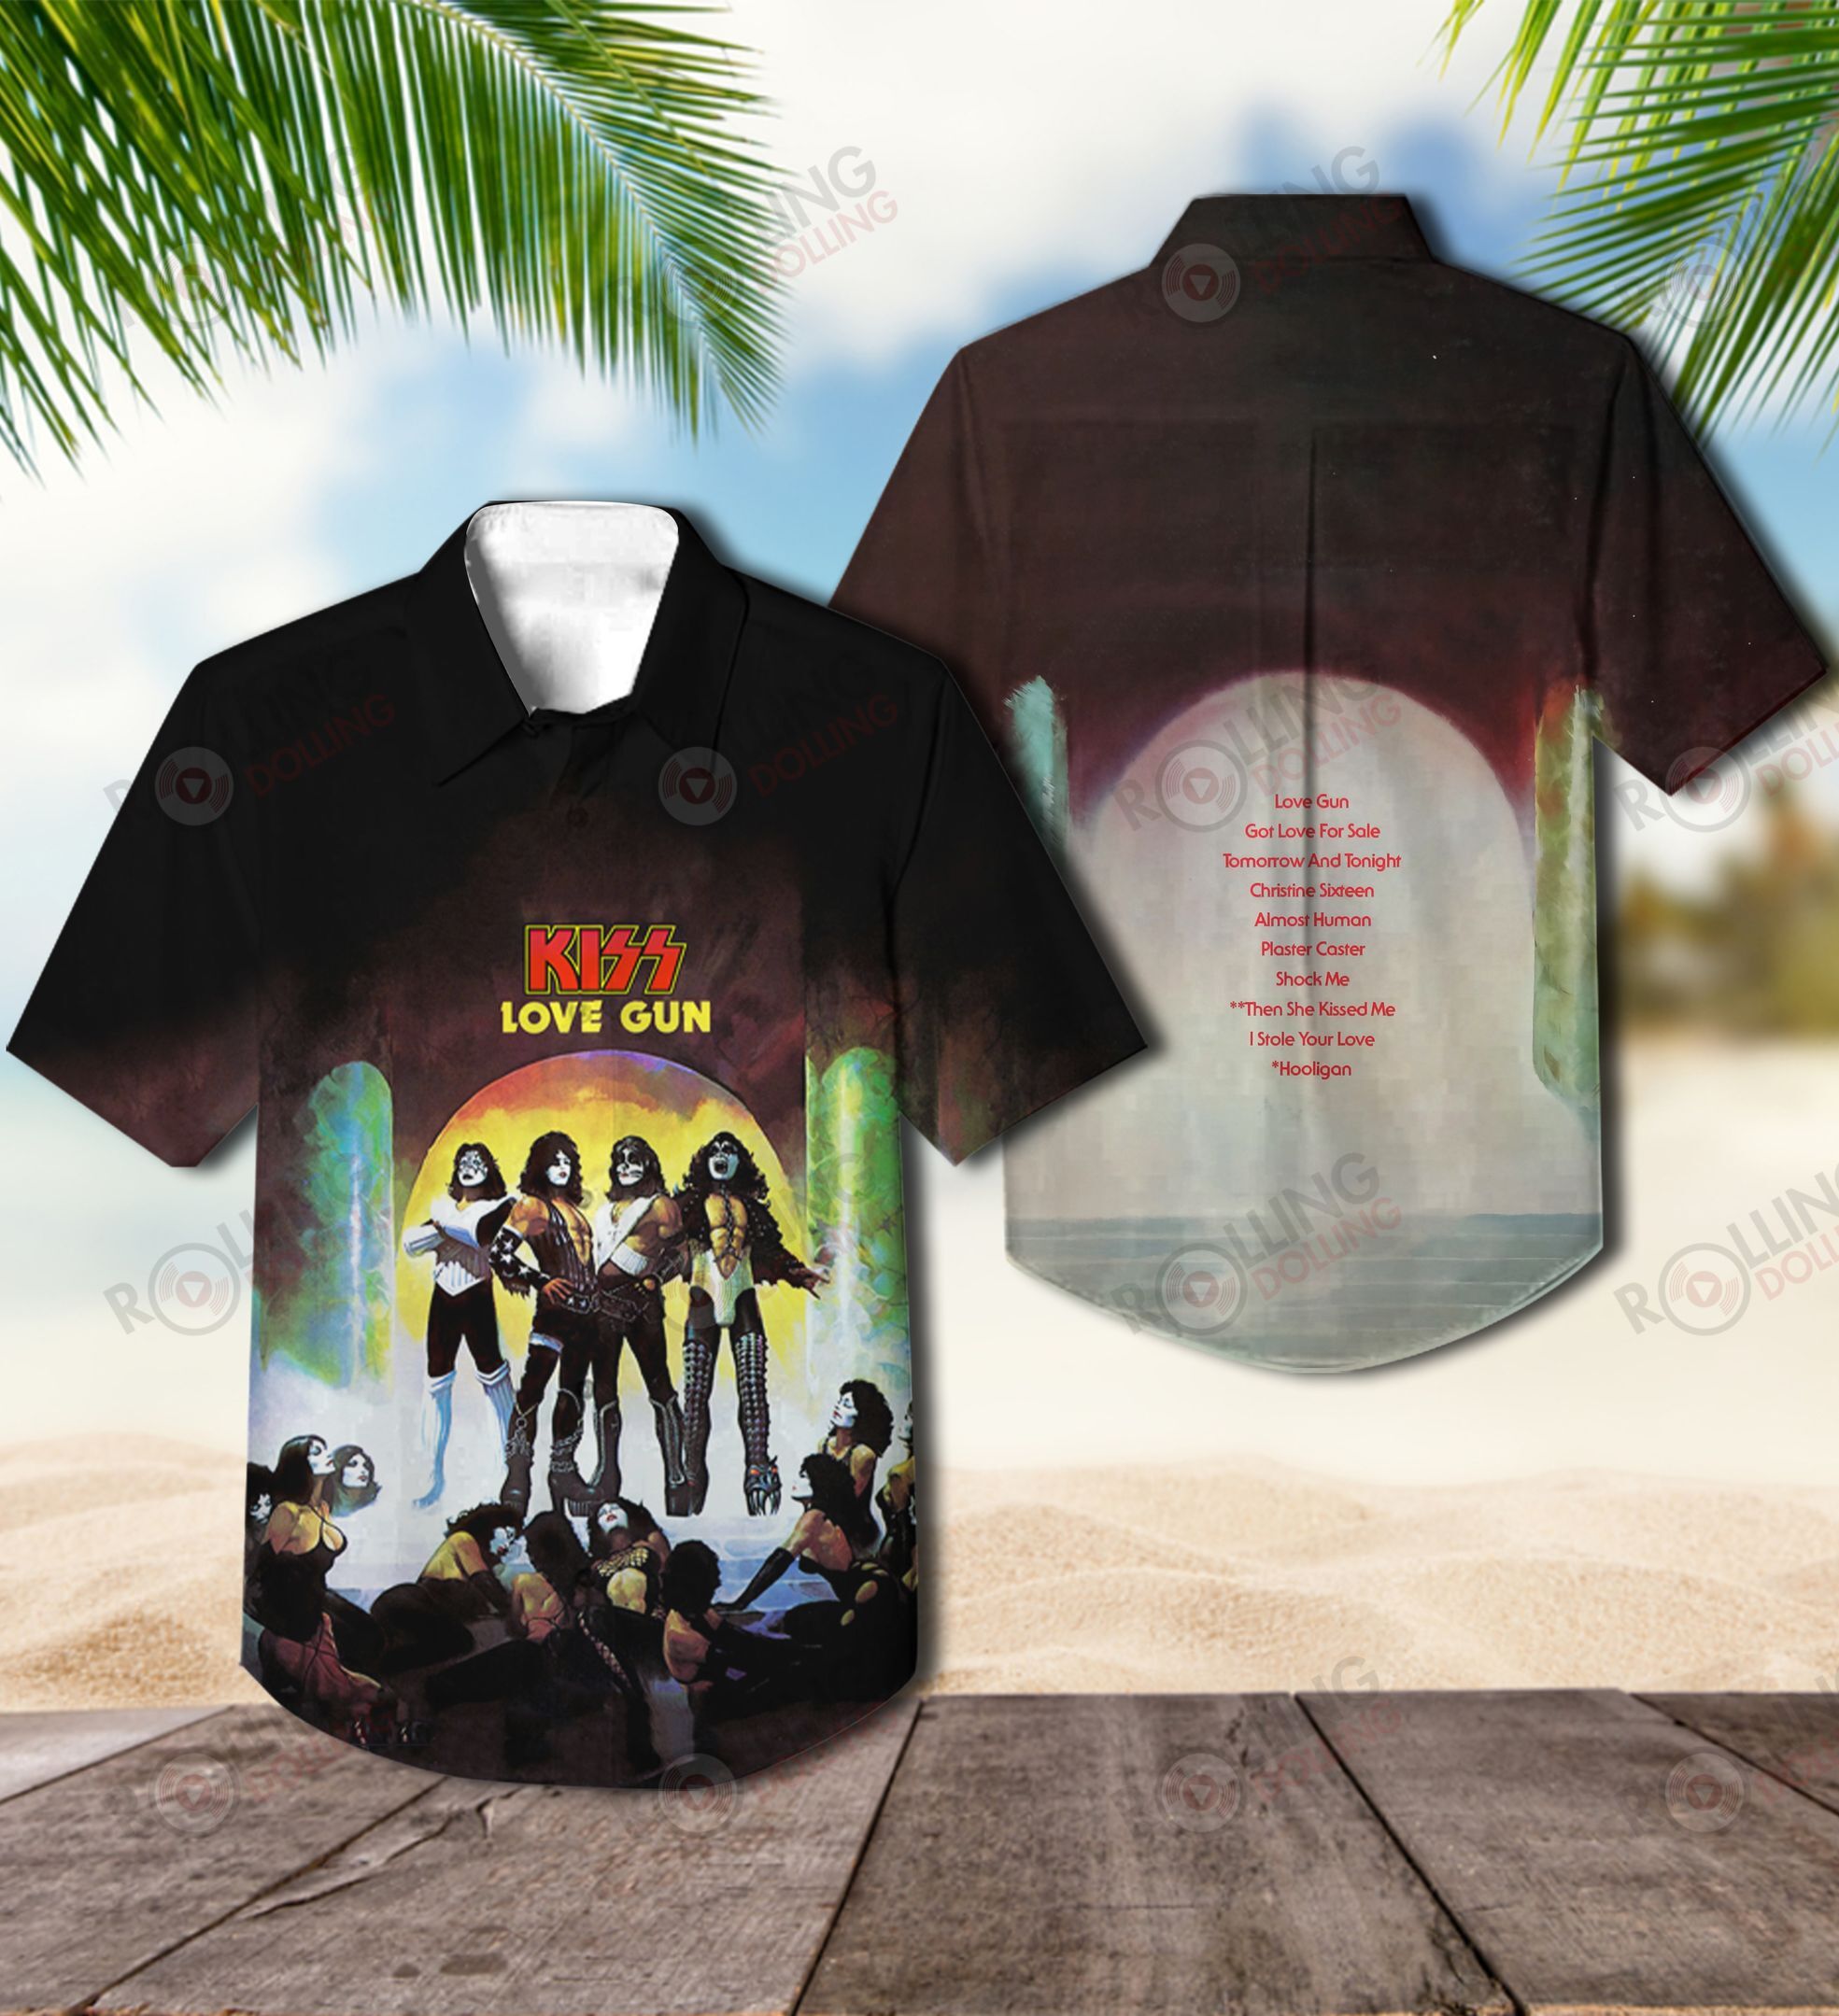 This would make a great gift for any fan who loves Hawaiian Shirt as well as Rock band 173